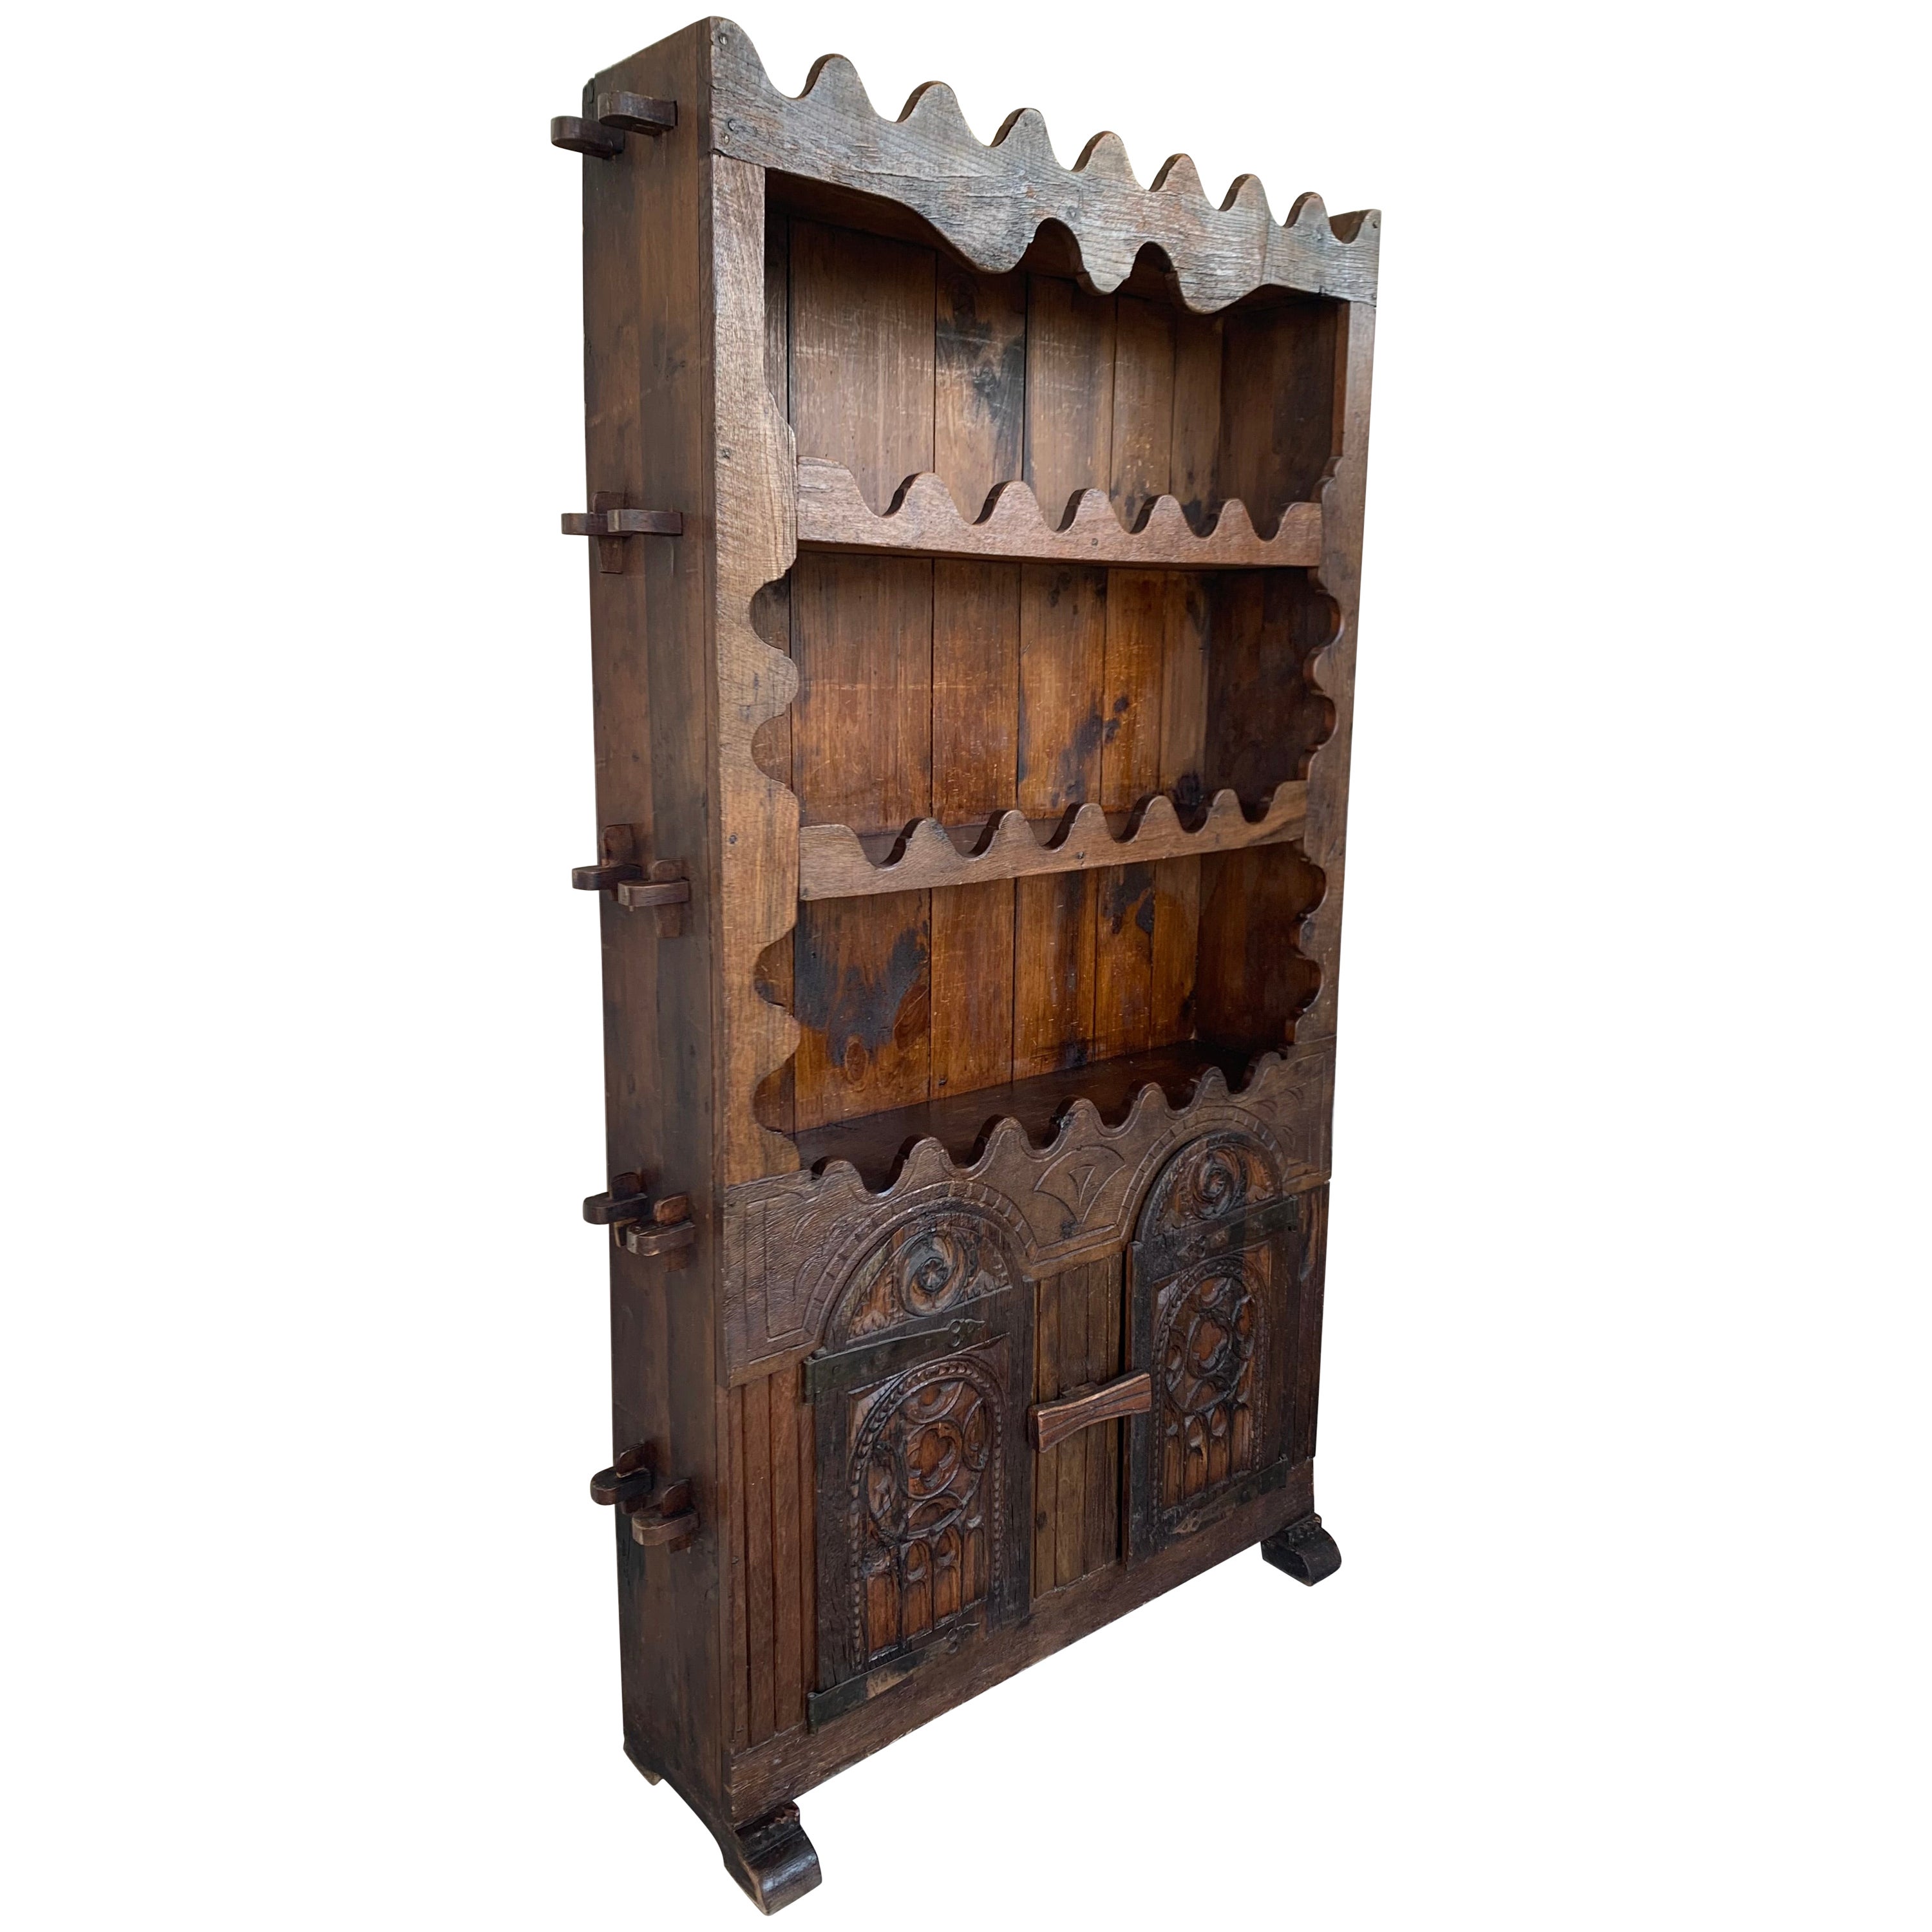 Early 18th Century Rustic-Country Spanish Open Bookcase with Gothic Reliefs